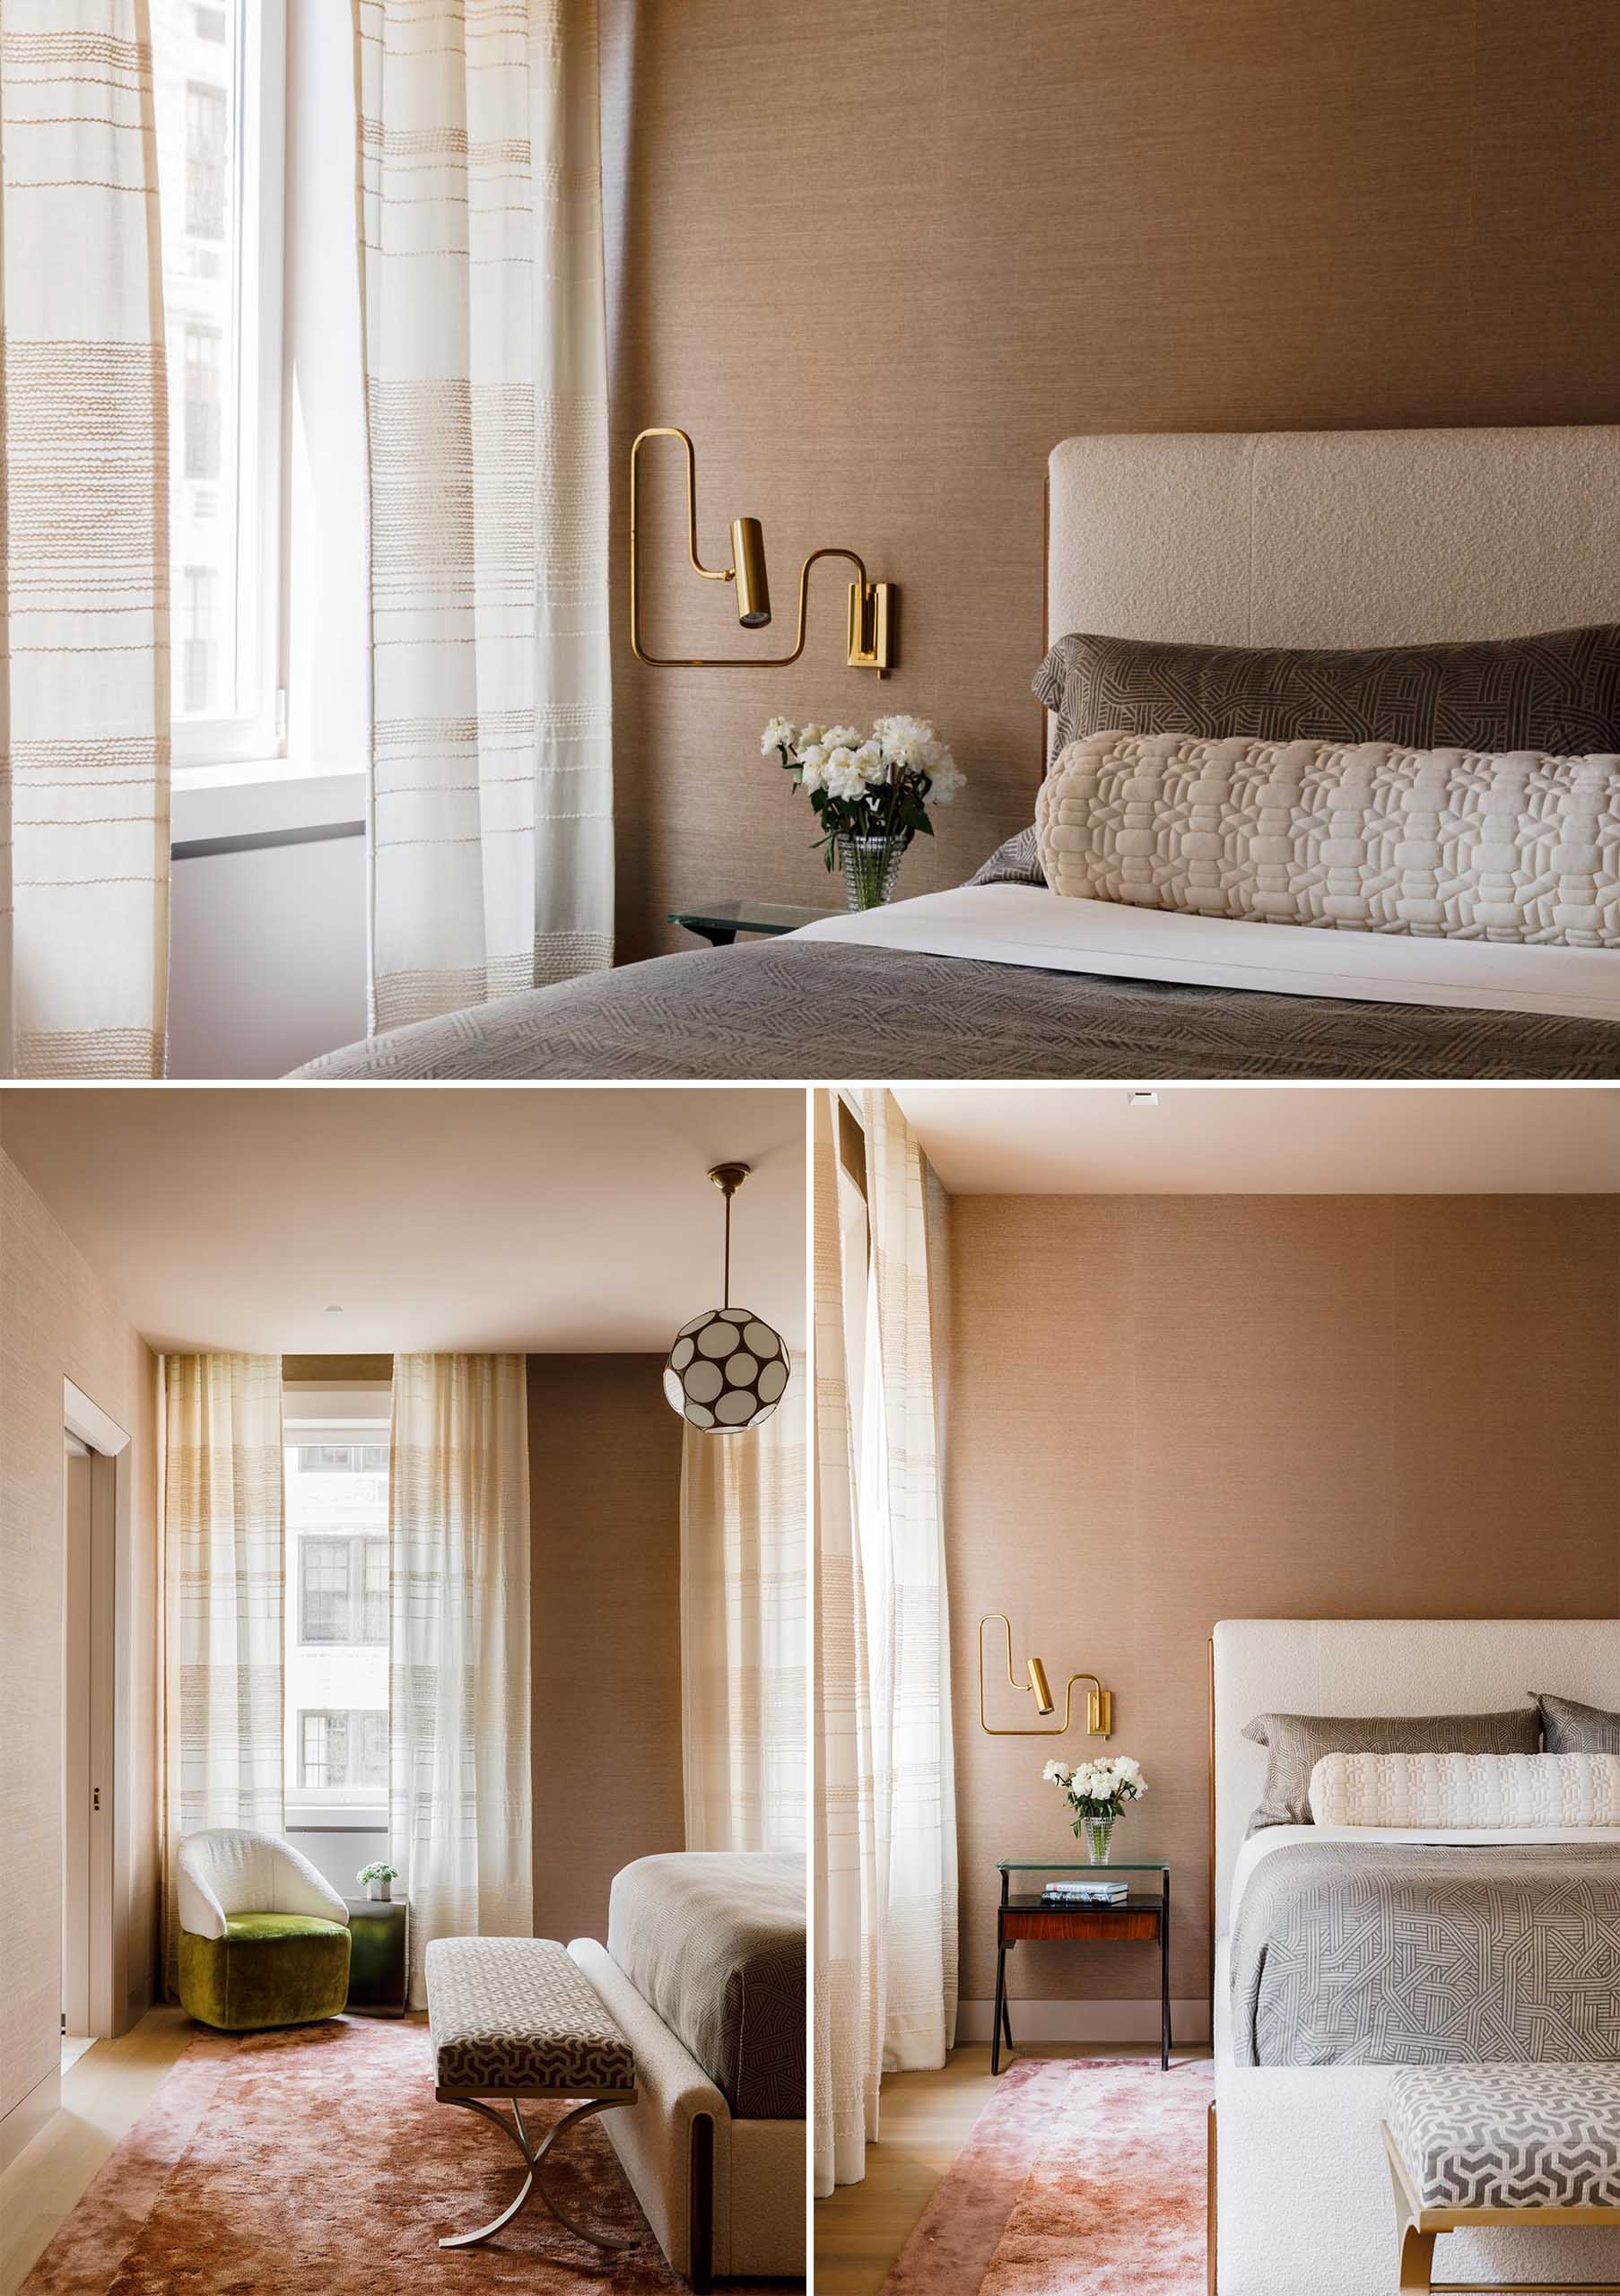 This main bedroom includes design elements like a custom upholstered bed by MKCA in walnut and boucle, silk wallcovering by Philip Jeffries, a silk carpet by MKCA and fabricated by Tai Ping, and custom loomed drapery textile by Hiroko Takeda.